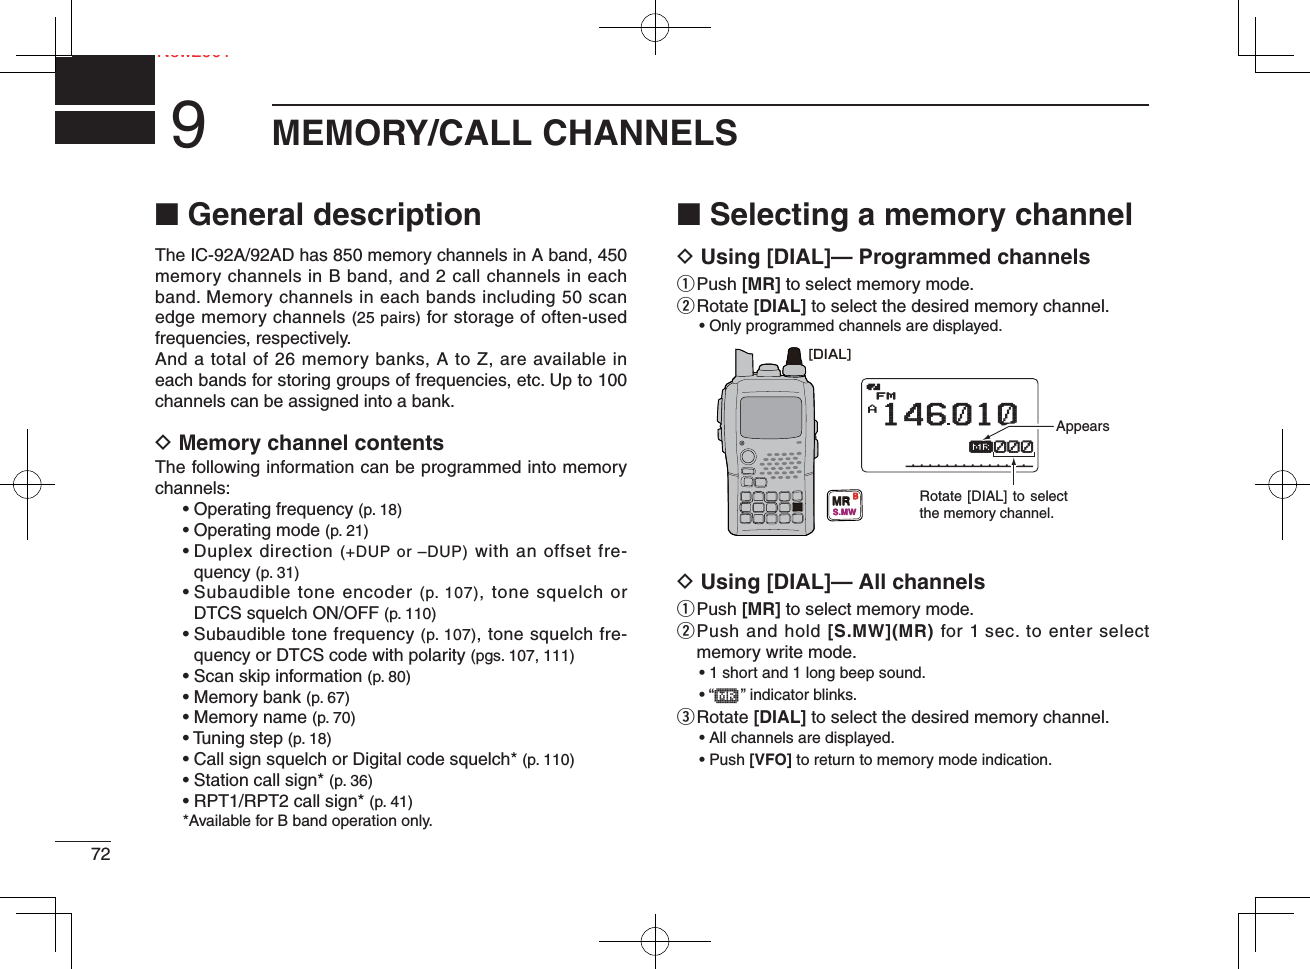 72NeNew2001MEMORY/CALL CHANNELS9■ General descriptionThe IC-92A/92AD has 850 memory channels in A band, 450 memory channels in B band, and 2 call channels in each band. Memory channels in each bands including 50 scan edge memory channels (25 pairs) for storage of often-used frequencies, respectively.And a total of 26 memory banks, A to Z, are available in each bands for storing groups of frequencies, etc. Up to 100 channels can be assigned into a bank.D Memory channel contentsThe following information can be programmed into memory channels:• Operating frequency (p. 18)• Operating mode (p. 21)•  Duplex direction (+DUP or –DUP) with an offset fre-quency (p. 31)•  Subaudible tone encoder (p. 107), tone squelch or DTCS squelch ON/OFF (p. 110)•  Subaudible tone frequency (p. 107), tone squelch fre-quency or DTCS code with polarity (pgs. 107, 111)•  Scan skip information (p. 80)• Memory bank (p. 67)• Memory name (p. 70)• Tuning step (p. 18)• Call sign squelch or Digital code squelch* (p. 110)• Station call sign* (p. 36)• RPT1/RPT2 call sign* (p. 41)*Available for B band operation only.■ Selecting a memory channelD Using [DIAL]— Programmed channelsq  Push [MR] to select memory mode.w  Rotate [DIAL] to select the desired memory channel.• Only programmed channels are displayed.D Using [DIAL]— All channelsq  Push [MR] to select memory mode.w  Push and hold [S.MW](MR) for 1 sec. to enter select memory write mode.• 1 short and 1 long beep sound.• “μ    ” indicator blinks.e  Rotate [DIAL] to select the desired memory channel.• All channels are displayed.• Push [VFO] to return to memory mode indication.AμFM146010000000[DIAL]MRS.MWBAppearsRotate [DIAL] to select the memory channel.